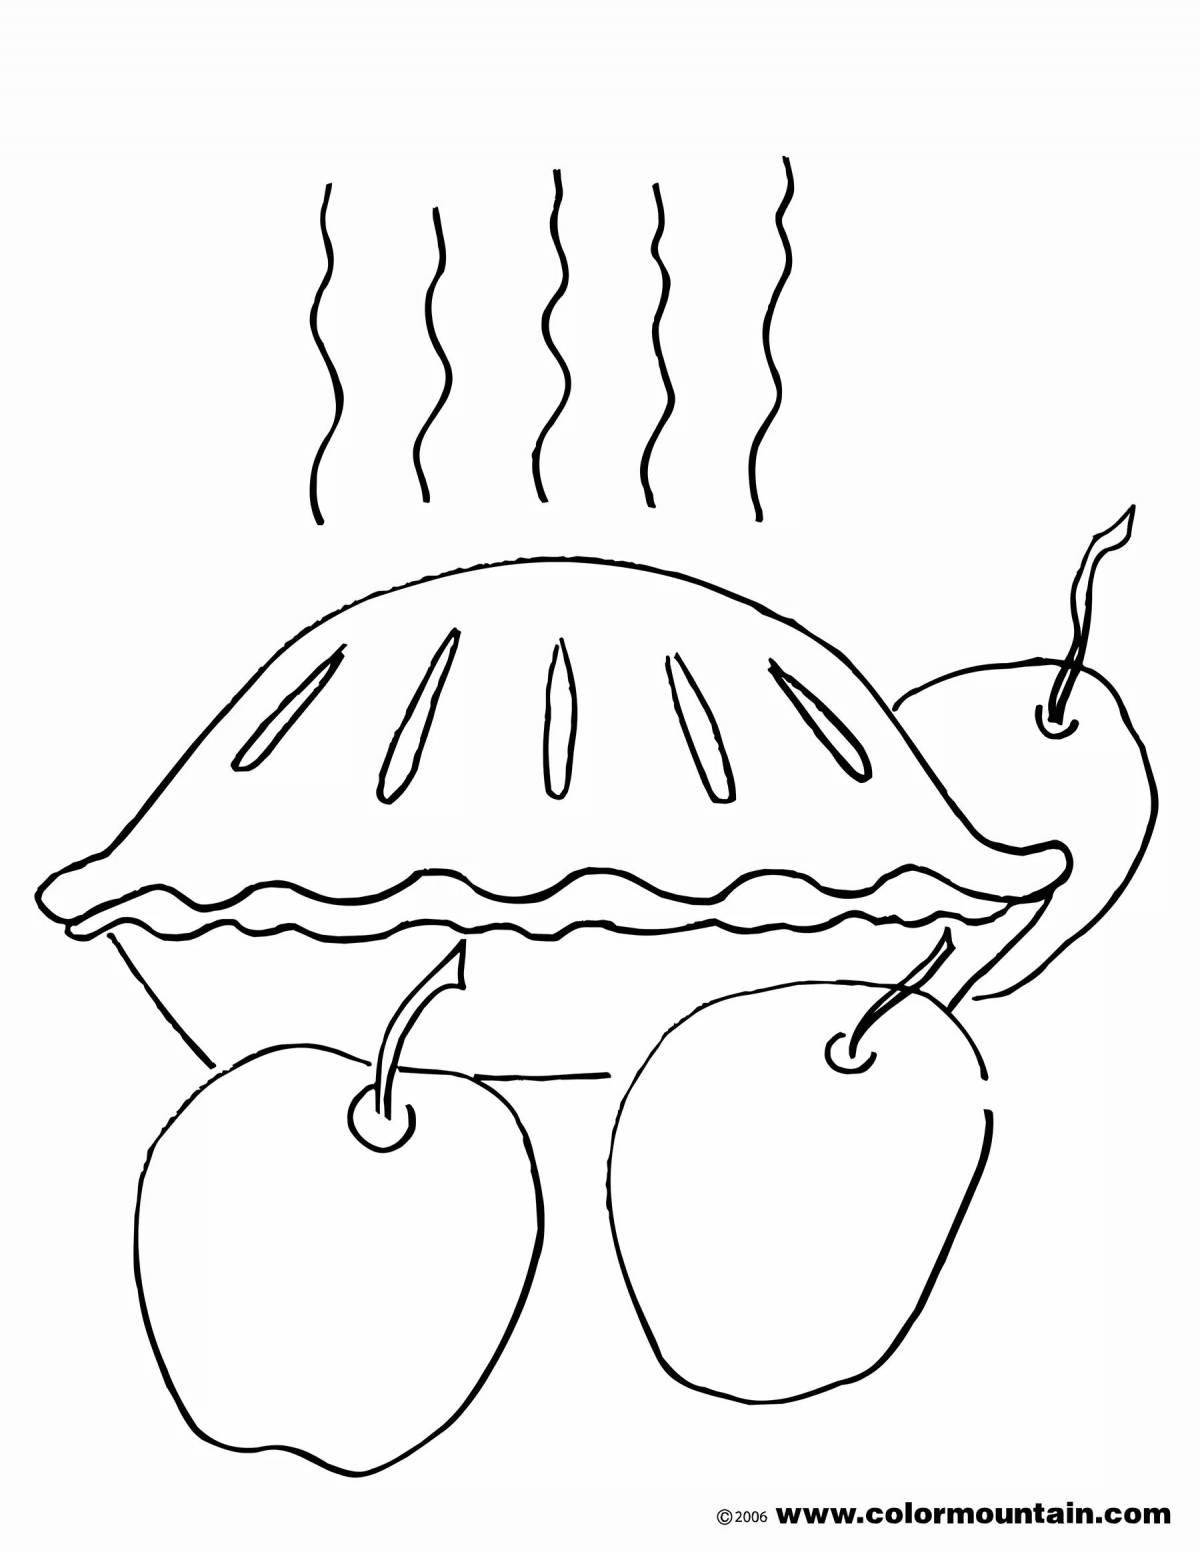 Animated pie coloring page for kids